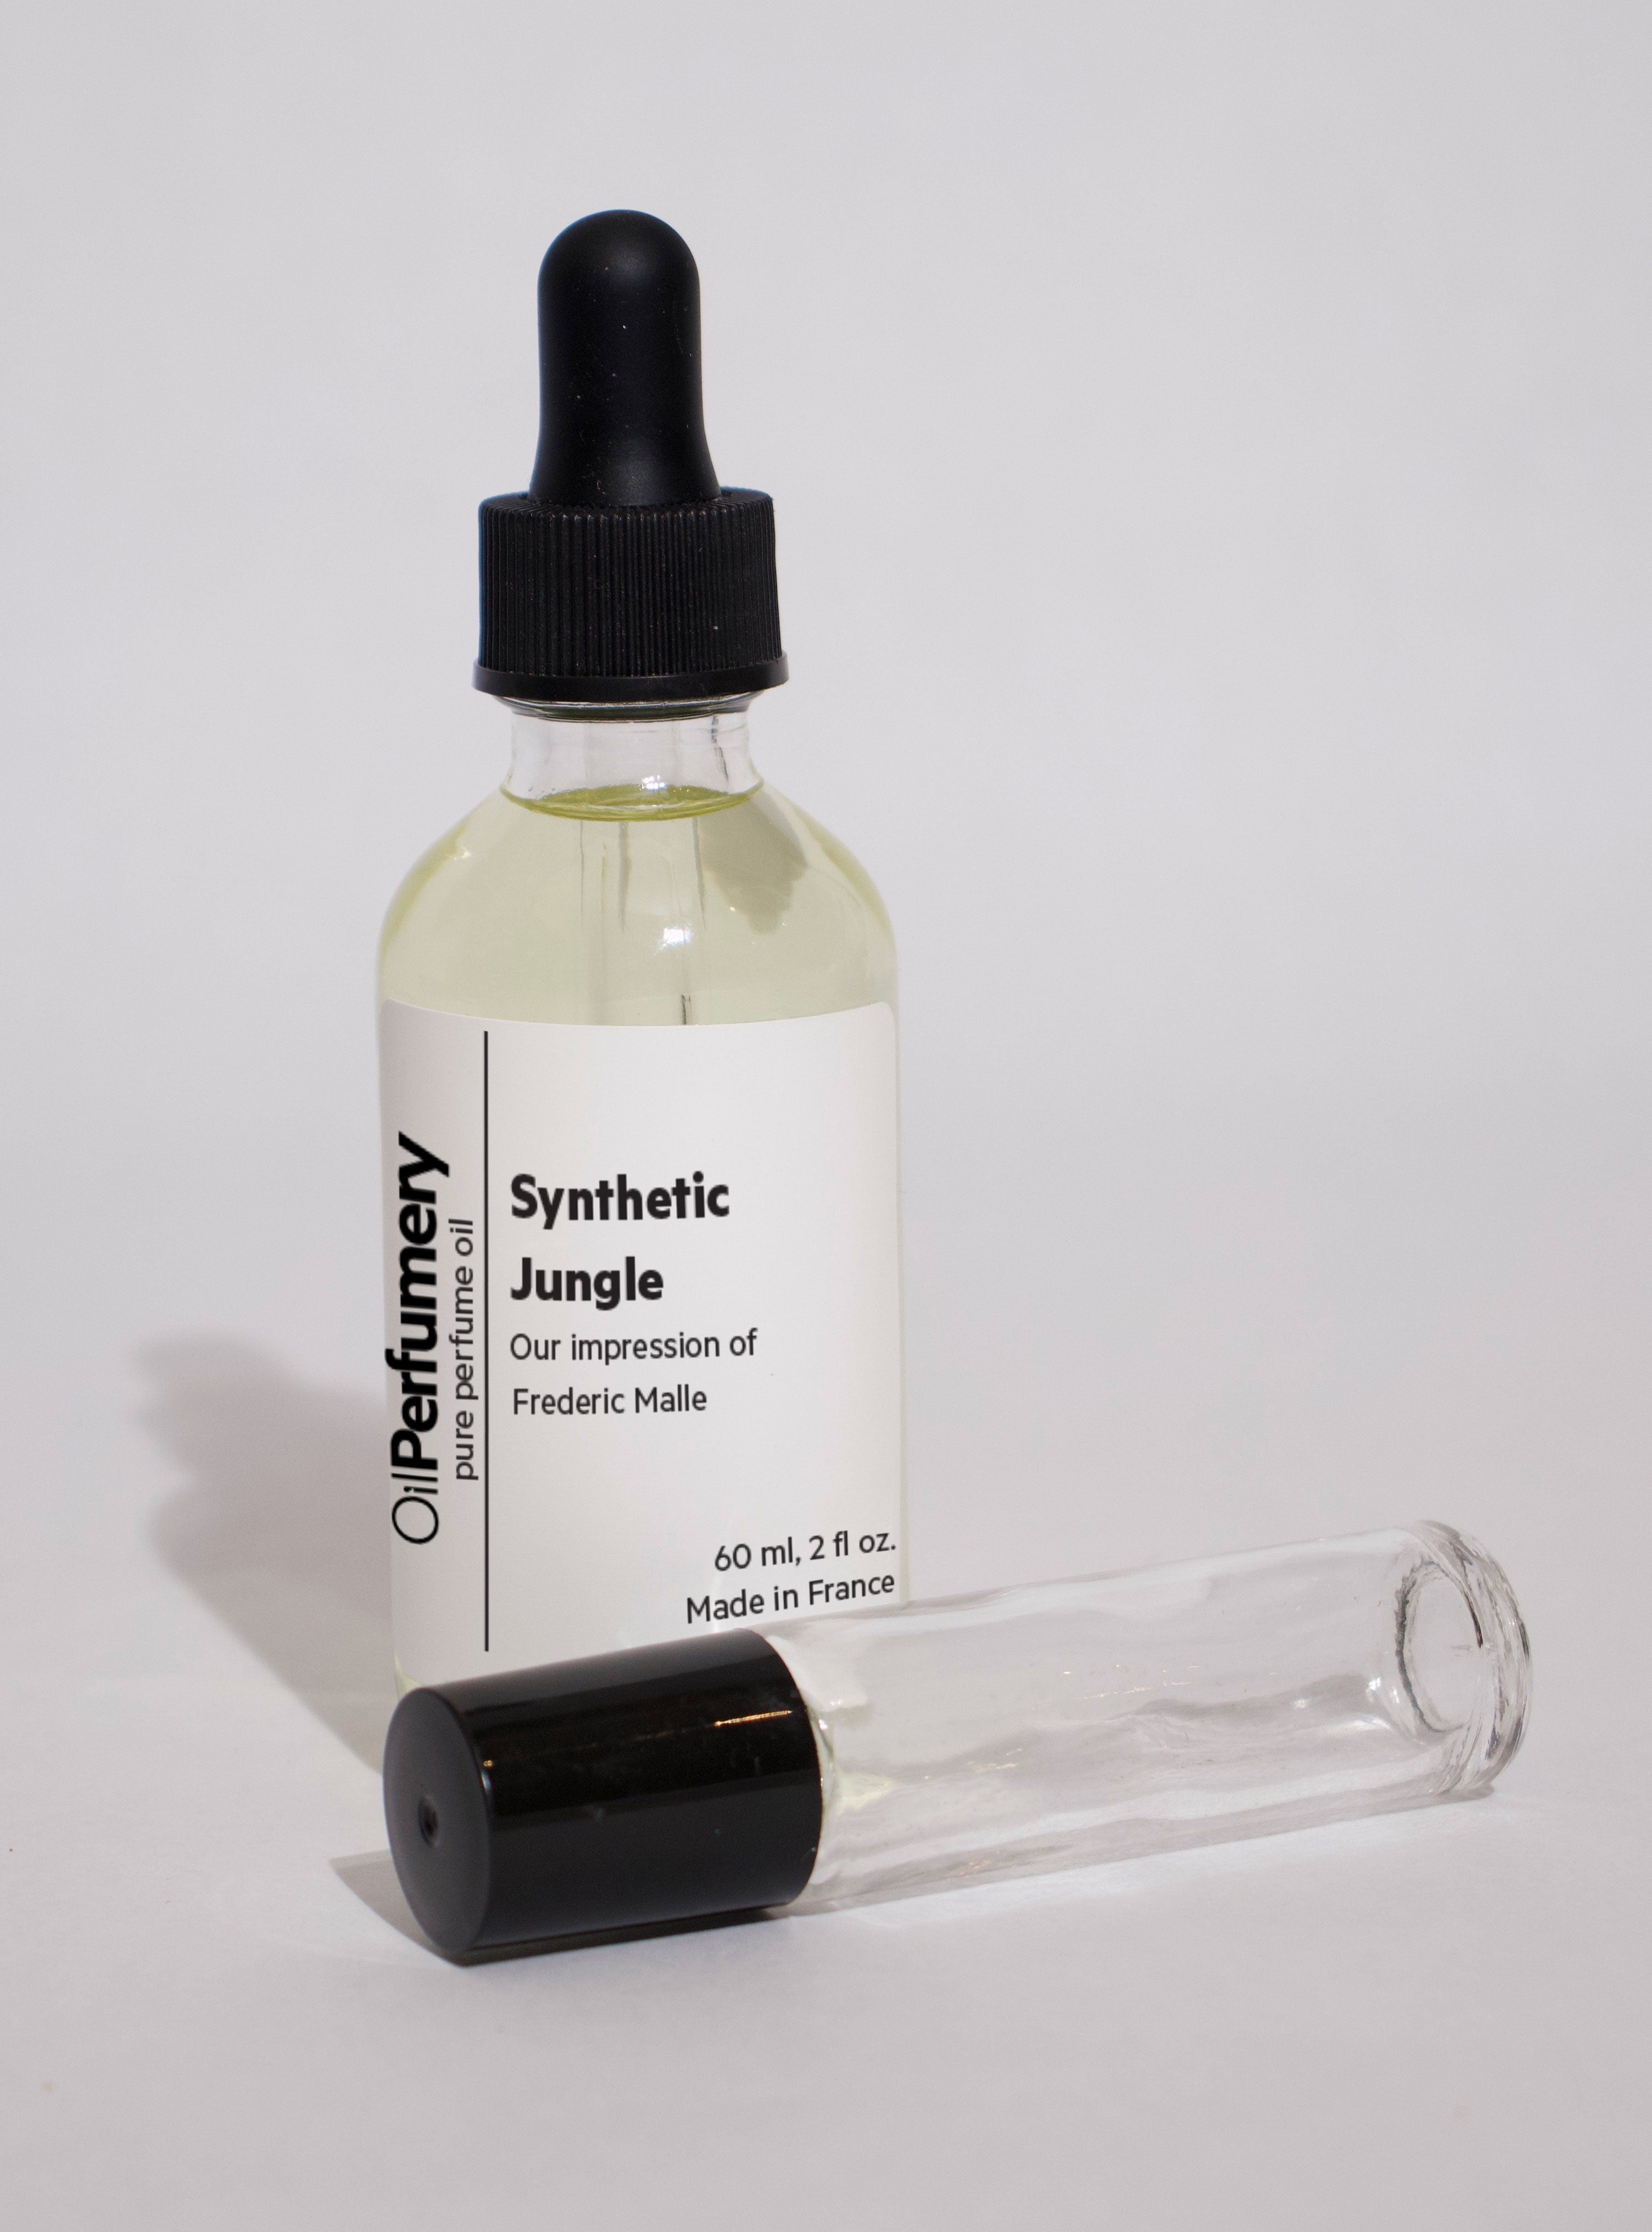 Oil Perfumery Impression of Frederic Malle - Synthetic Jungle